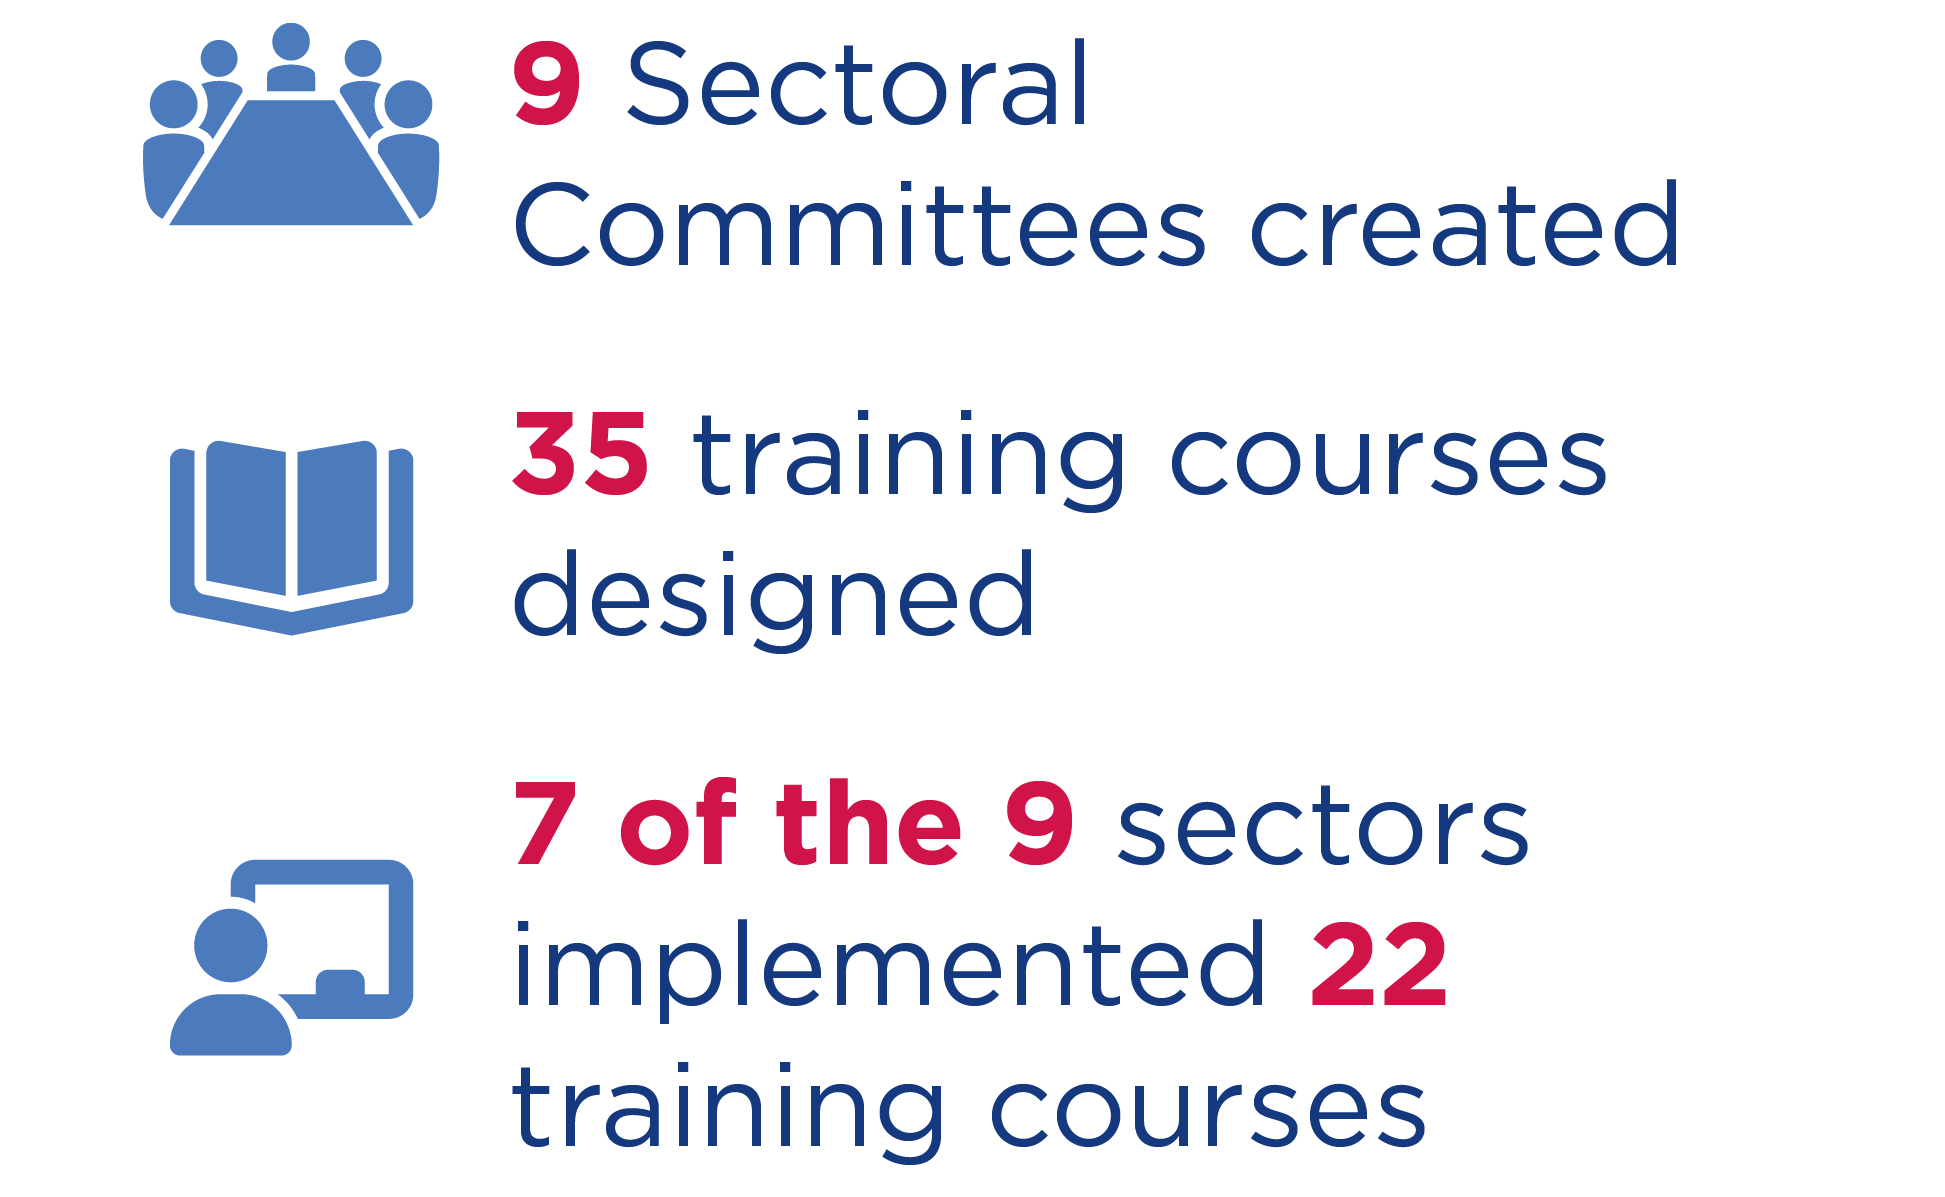 The chart shows key implementation milestones, which include: nine sectoral committees created, 35 training courses designed, and 22 training courses implemented.